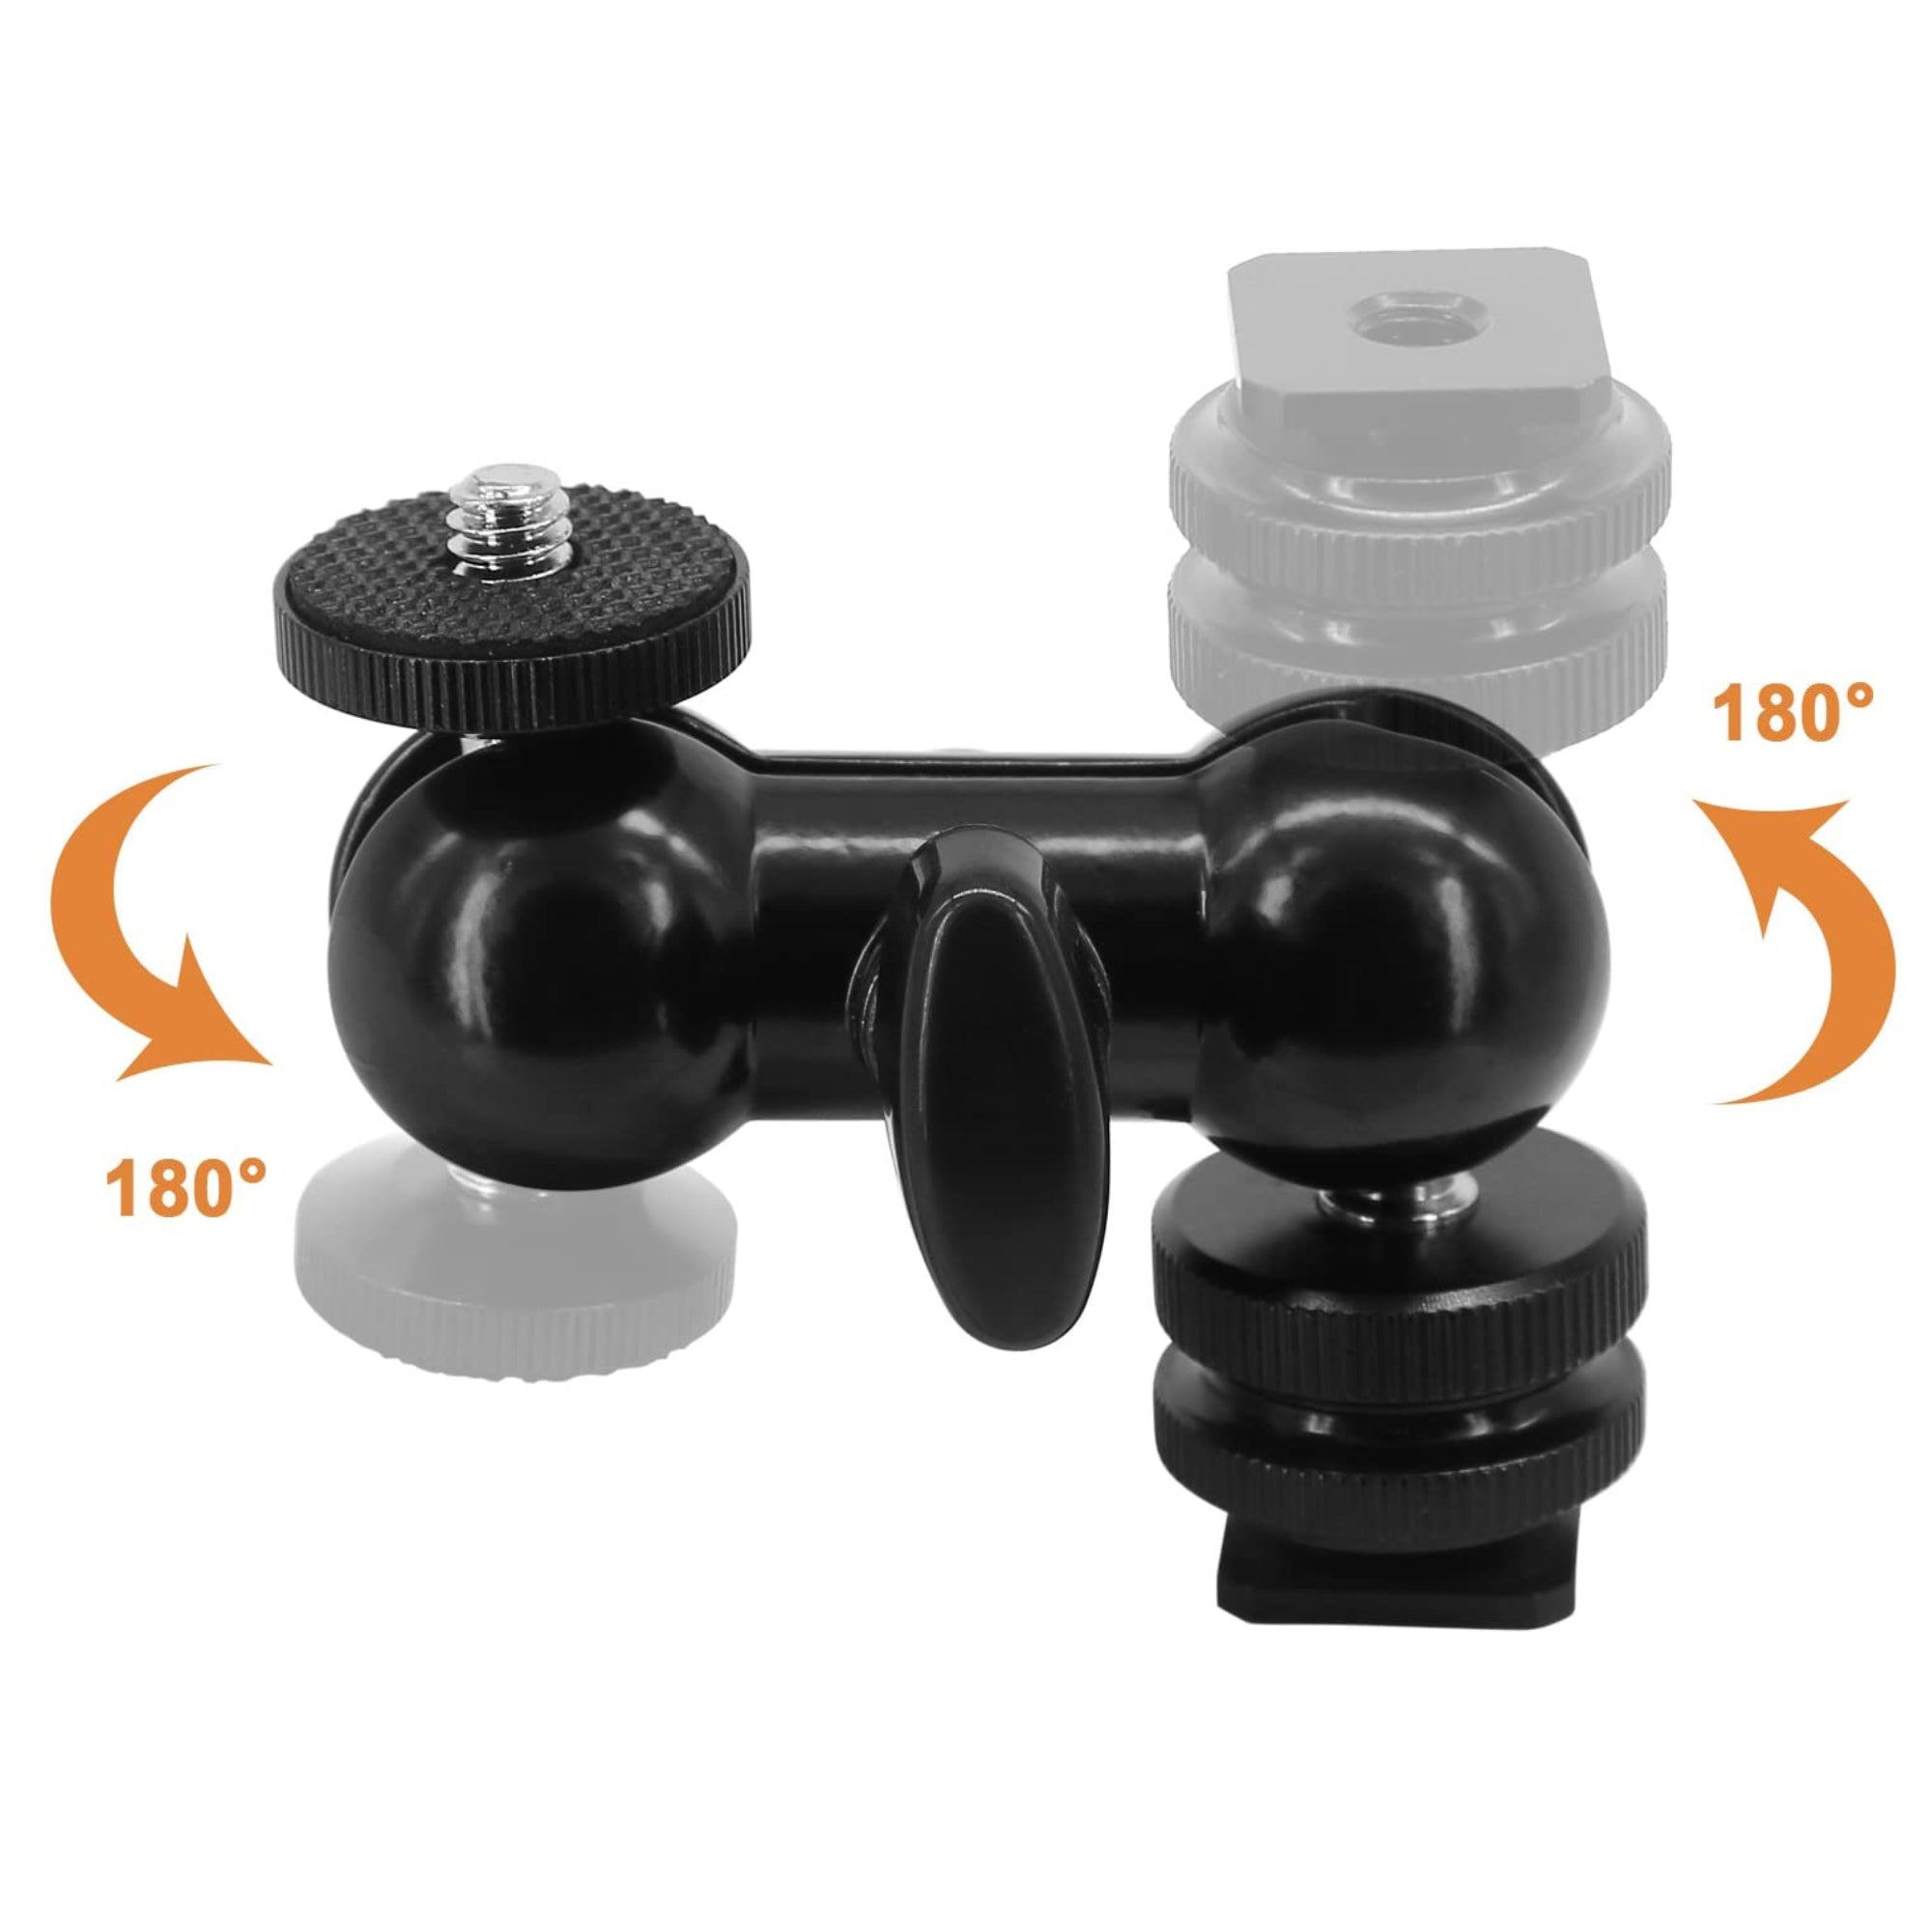 Multi-Function Double Ball head with Shoe Mount & 1/4" Screw